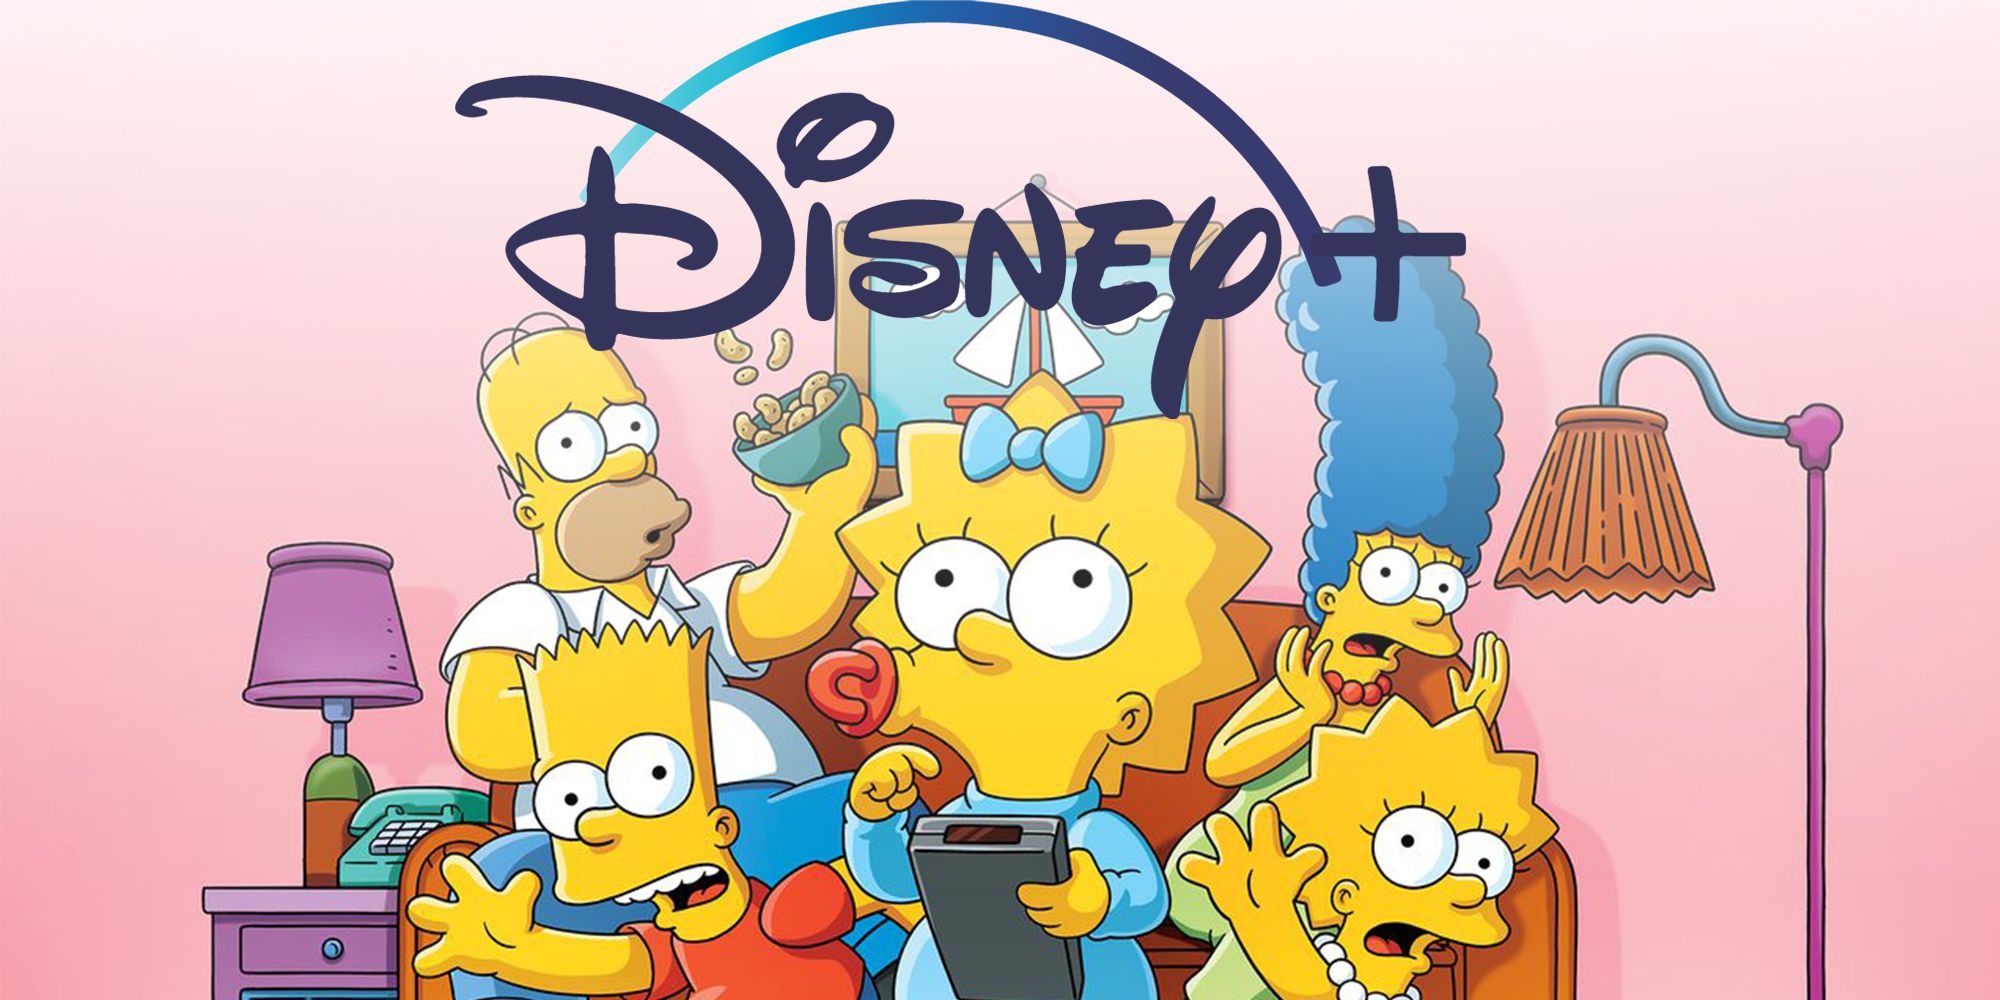 The Simpsons family gather on their couch below the Disney+ Logo